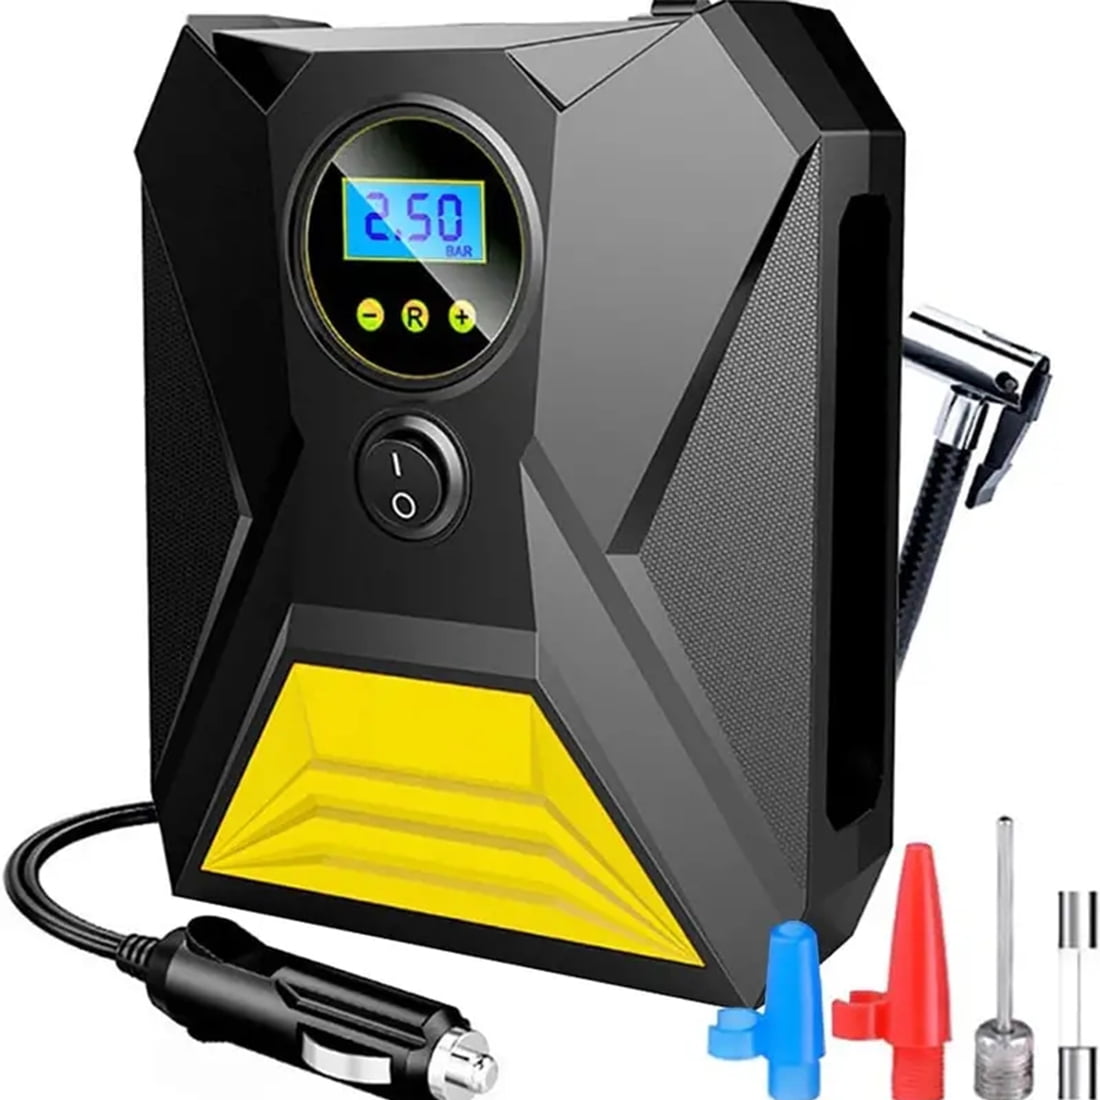 Cafele Wireless Tire Inflator, Portable Car Tire Air Compressor, Portable  Battery Powered 150PSI Air Pump Inflator For Cars, Motorcycles, Bicycles And